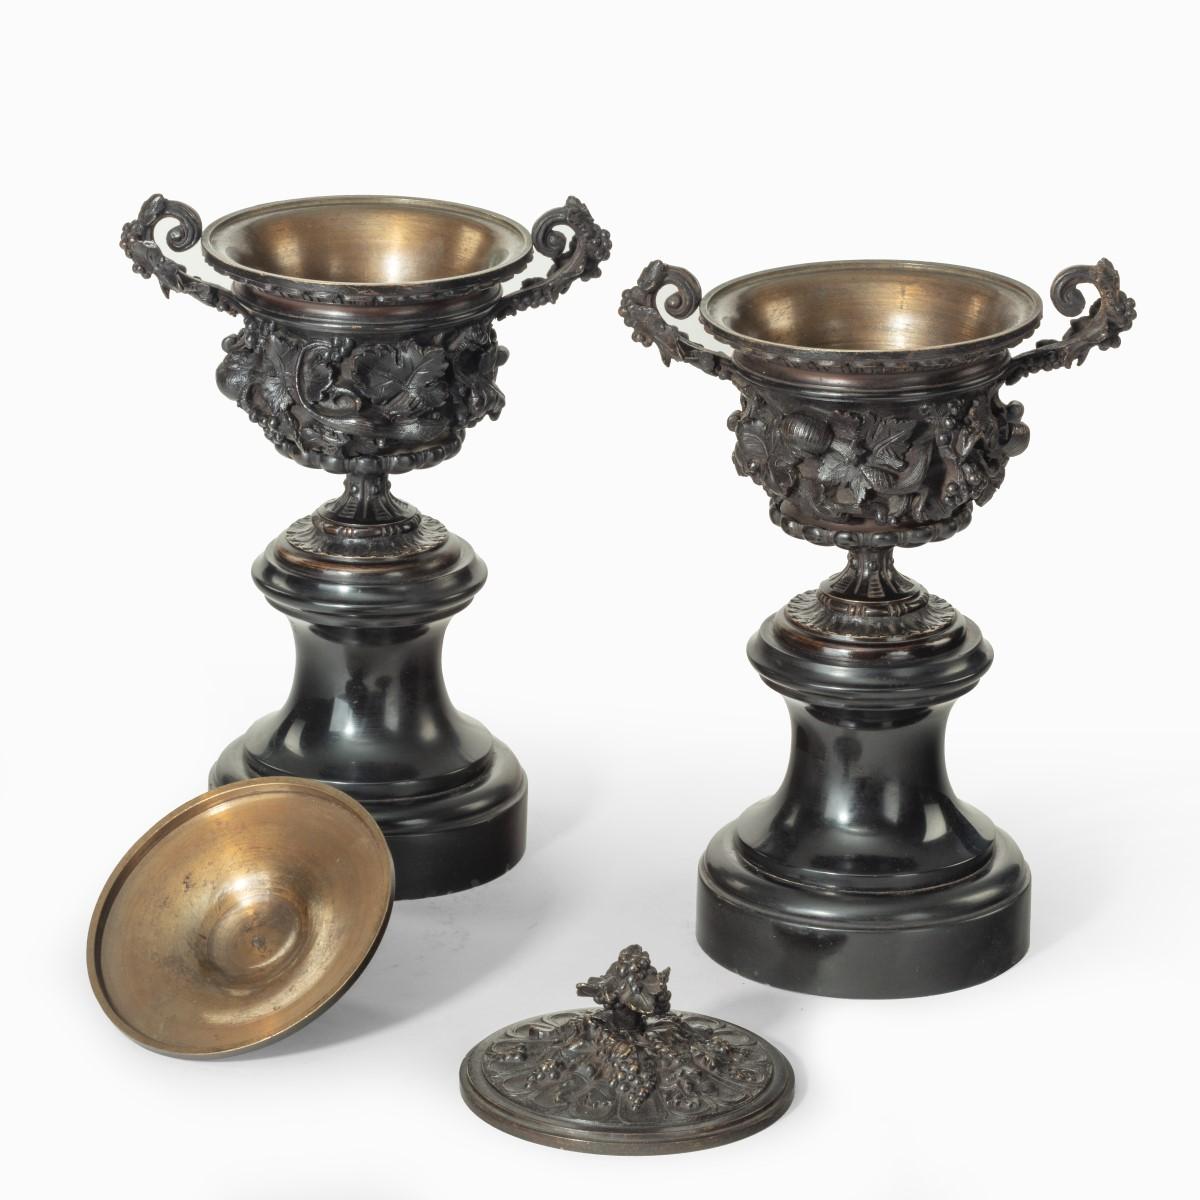 A Fine Pair of Bronze Urns or Vases and Covers After a Design Believed to Have Been Made By the French Animalier Auguste Nicolas Cain c.1870

The urns each on a shaped black marble socle, decorated overall in high relief with lizards and snails